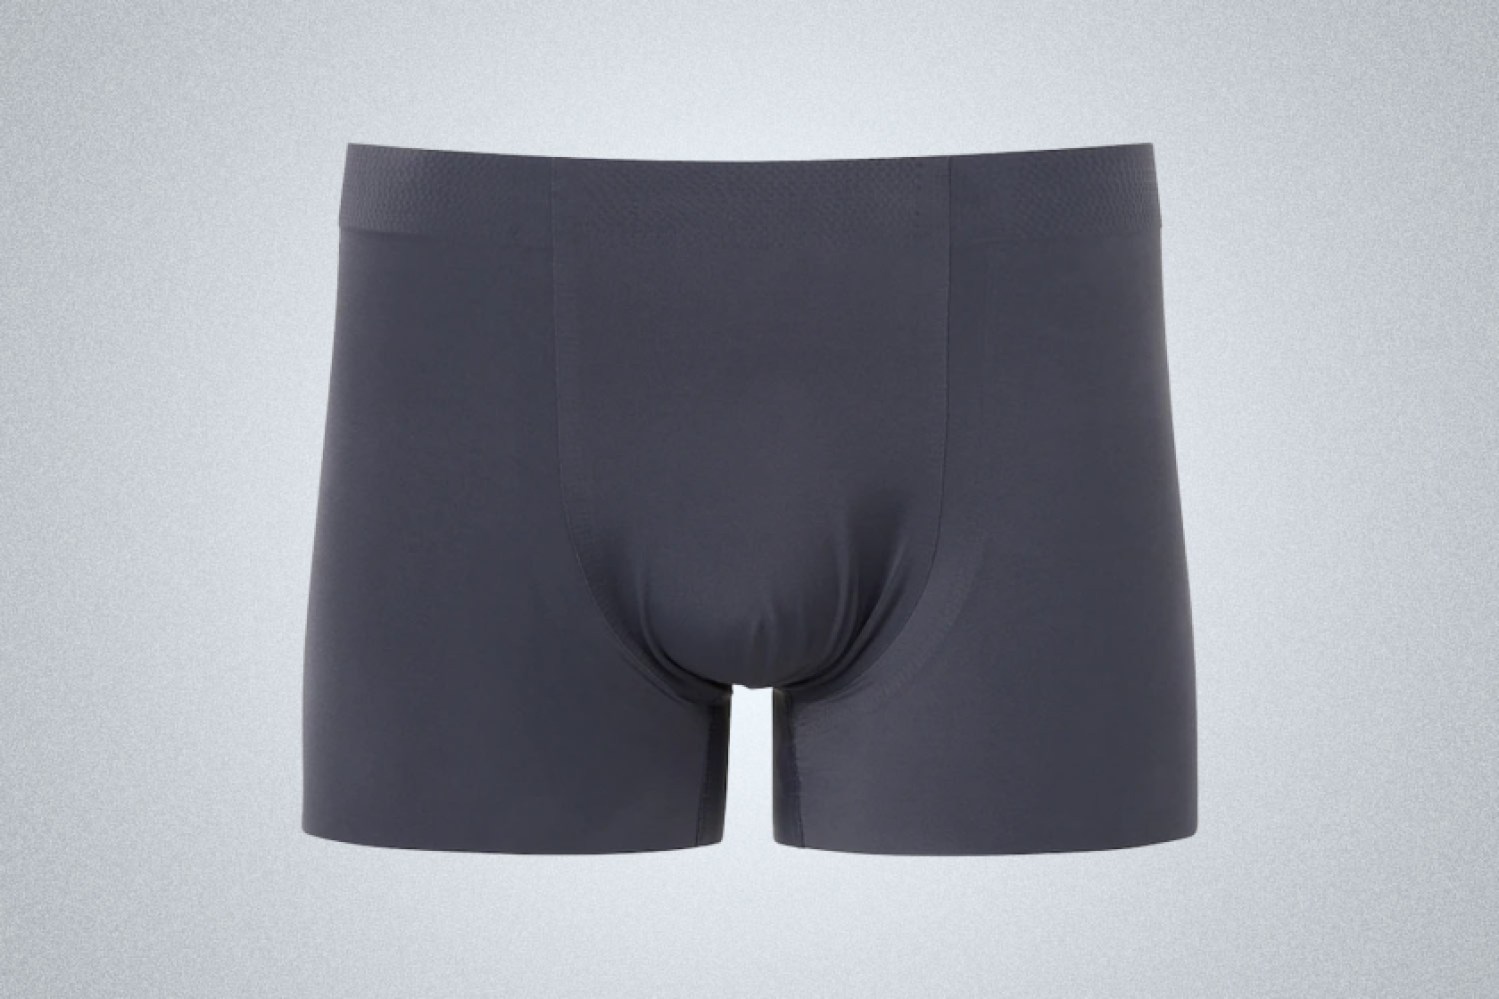 Claim your FREE pair of the UK's best selling boxer shorts - here's how